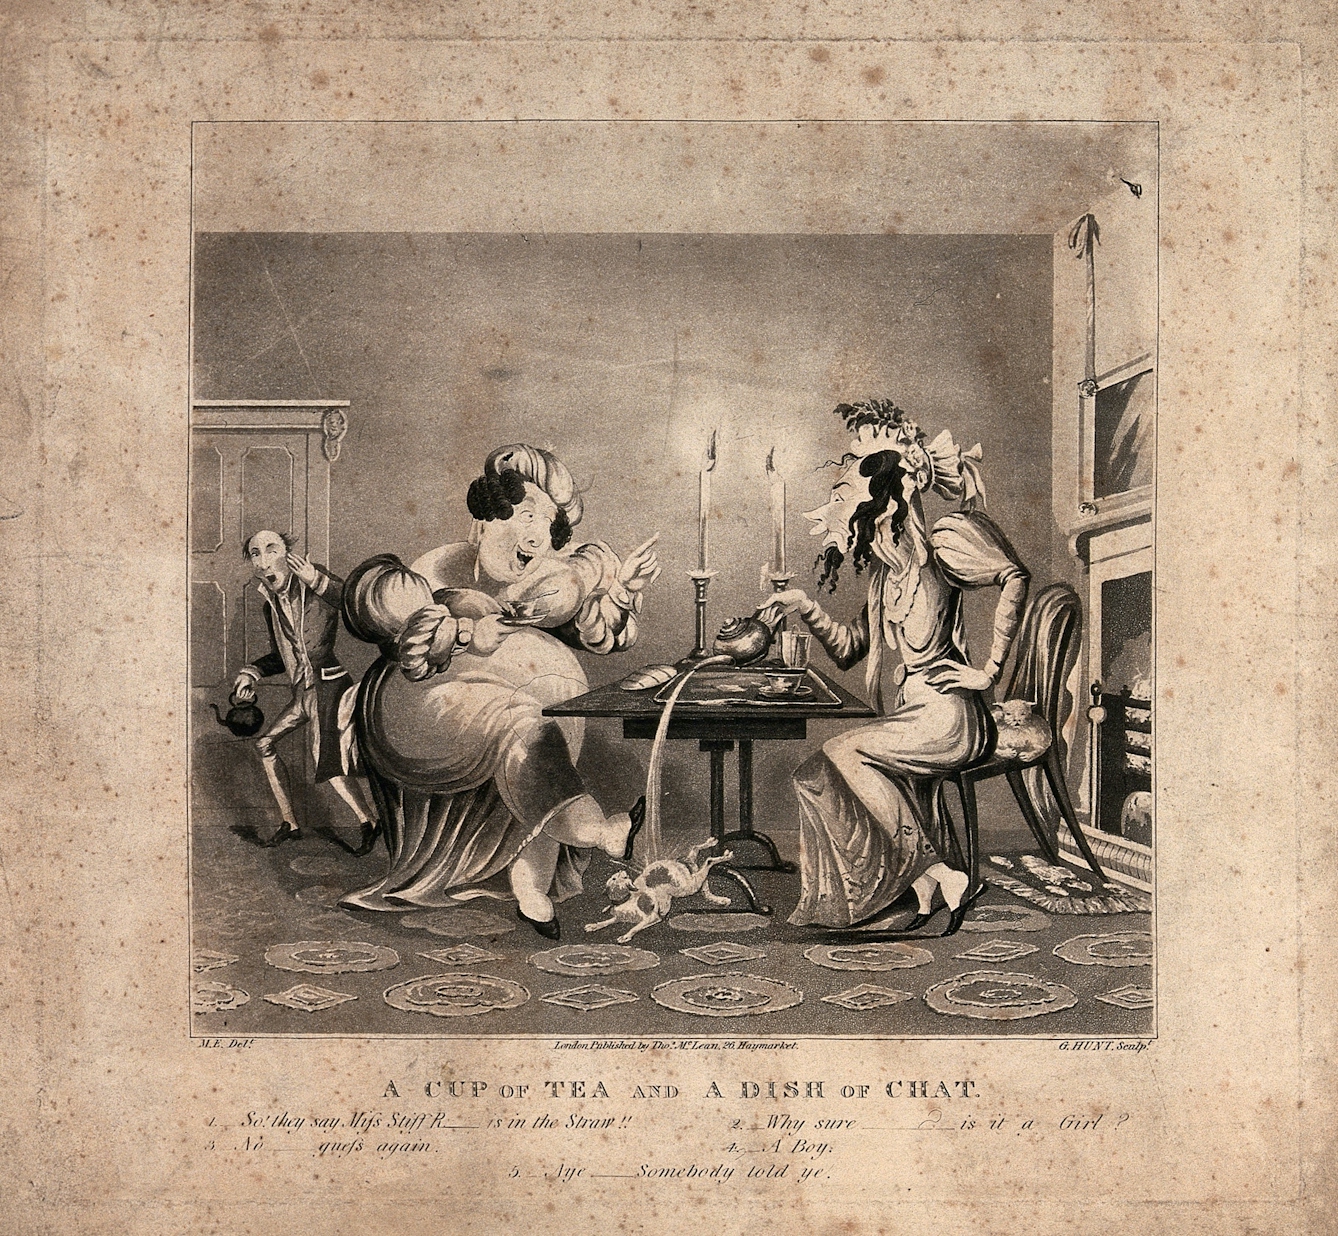 Black and white illustration showing two women sit at a table drinking tea and gossiping, and spilling tea on a cat. A man looks shocked in the background.